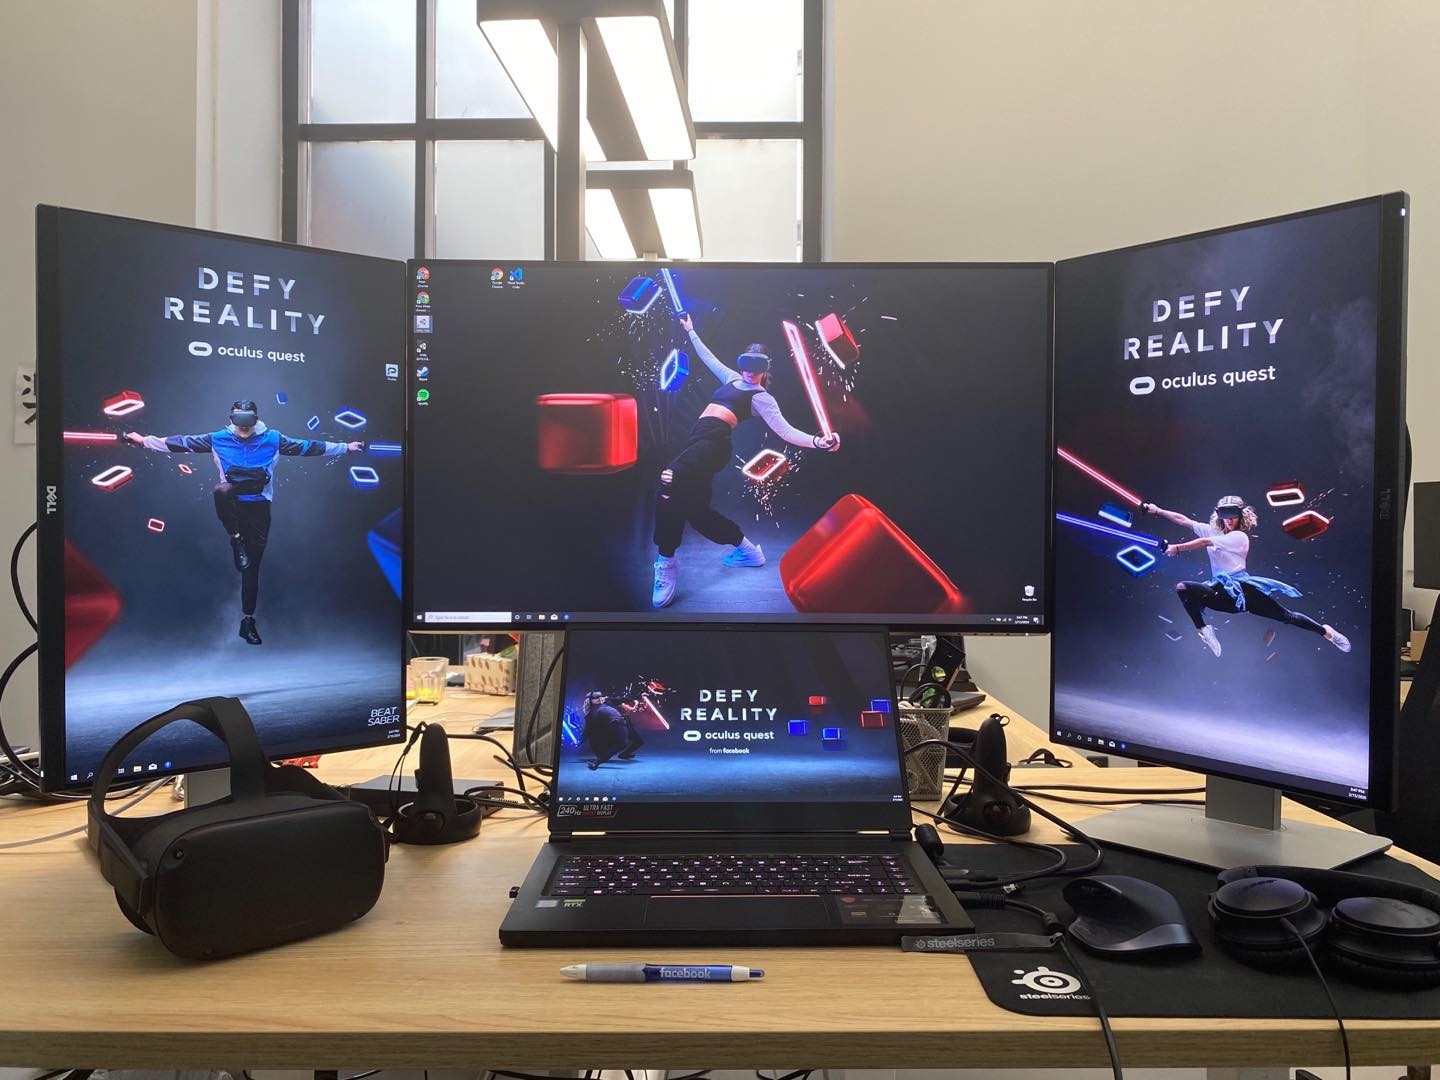 tankevækkende øjenbryn padle Beat Saber on Twitter: "We're still #WFH but can't wait to be back at our  office with this setup! 😍 https://t.co/Q4pAbtwjdn" / Twitter